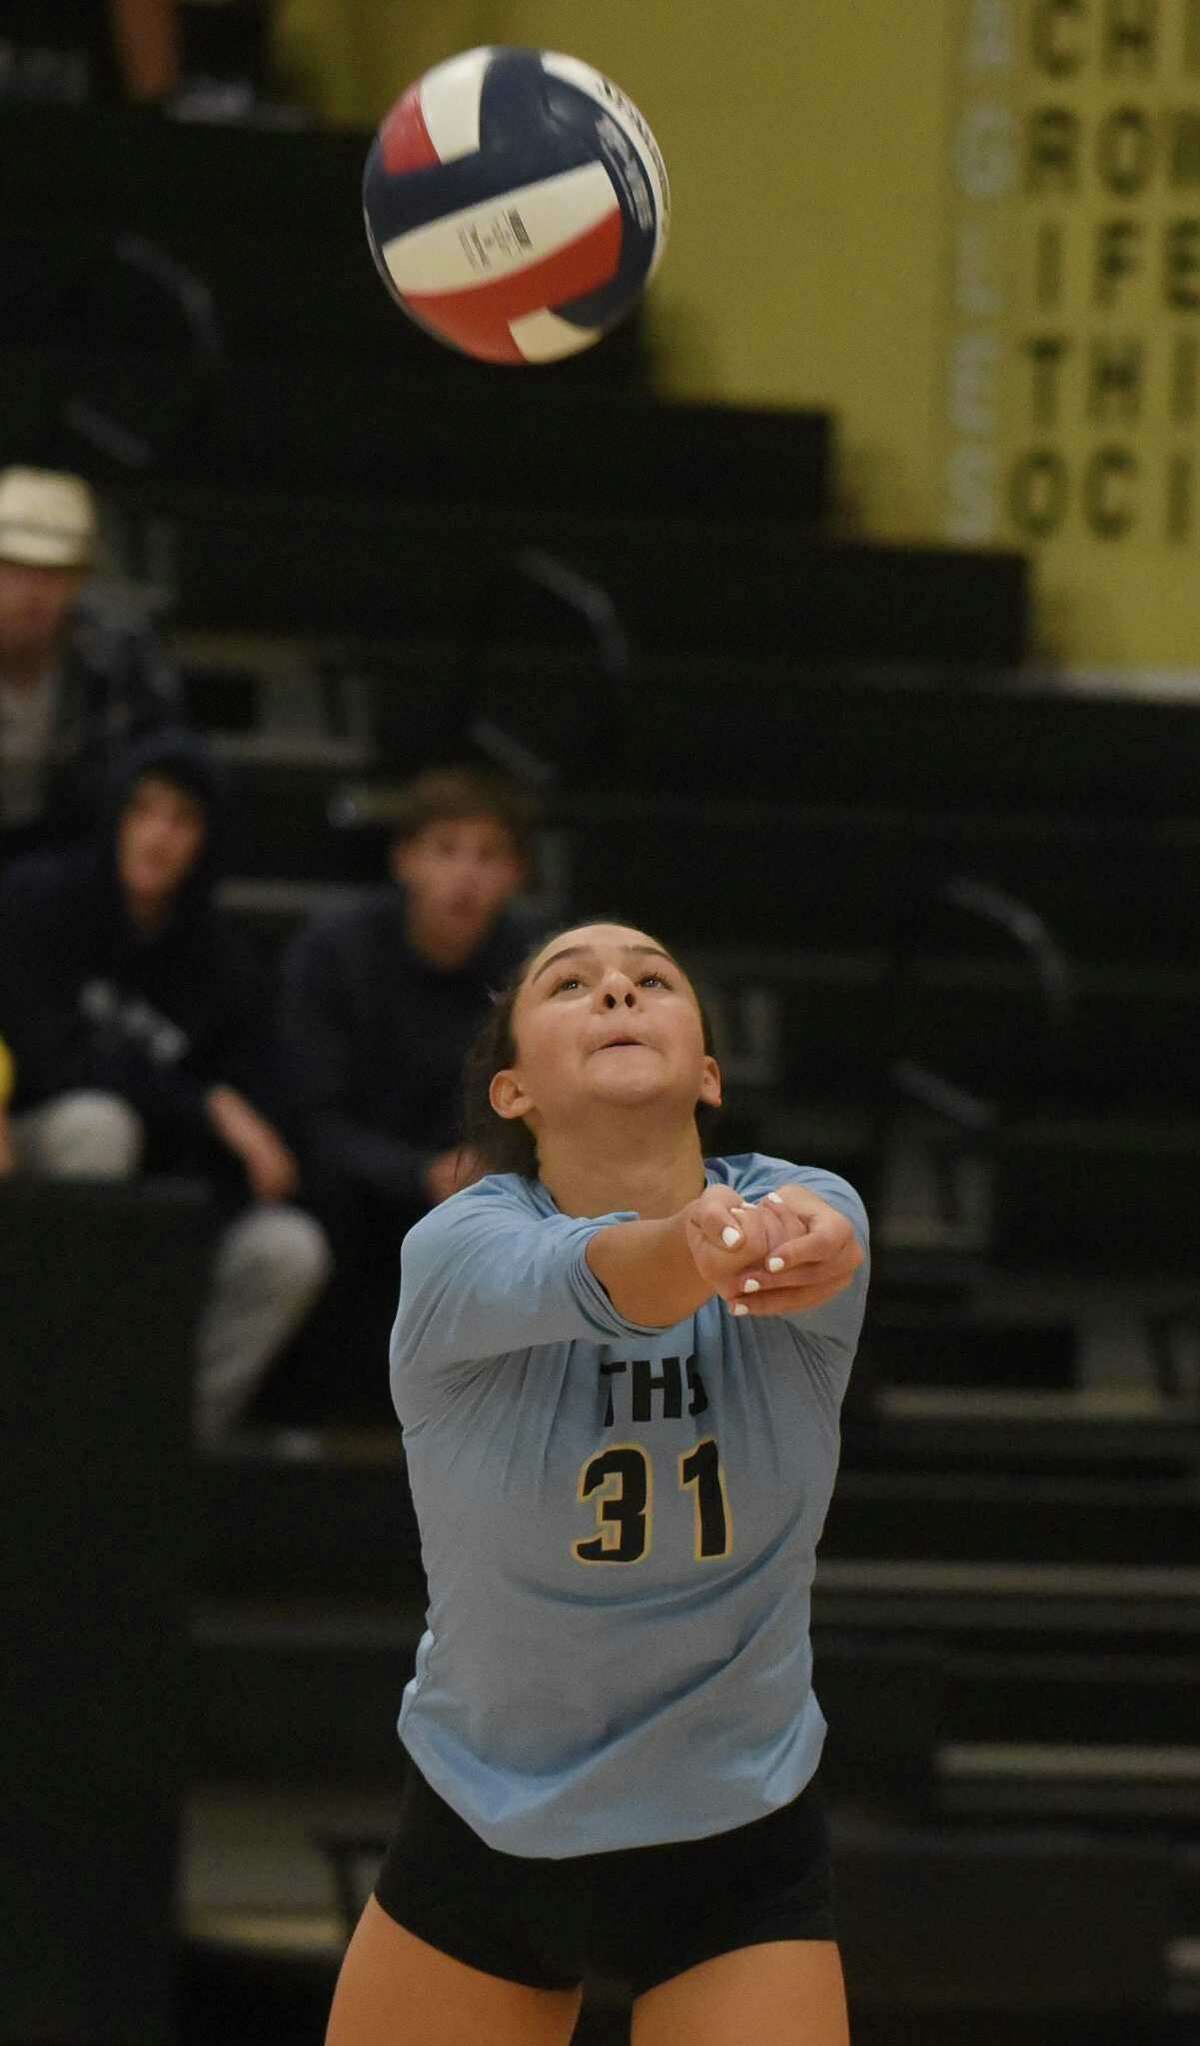 Trumbull libero Ashleigh Johnson (31) keeps the ball up during an FCIAC girls volleyball quarterfinal game against New Canaan at Trumbull High School on Tuesday, Nov. 5, 2019.